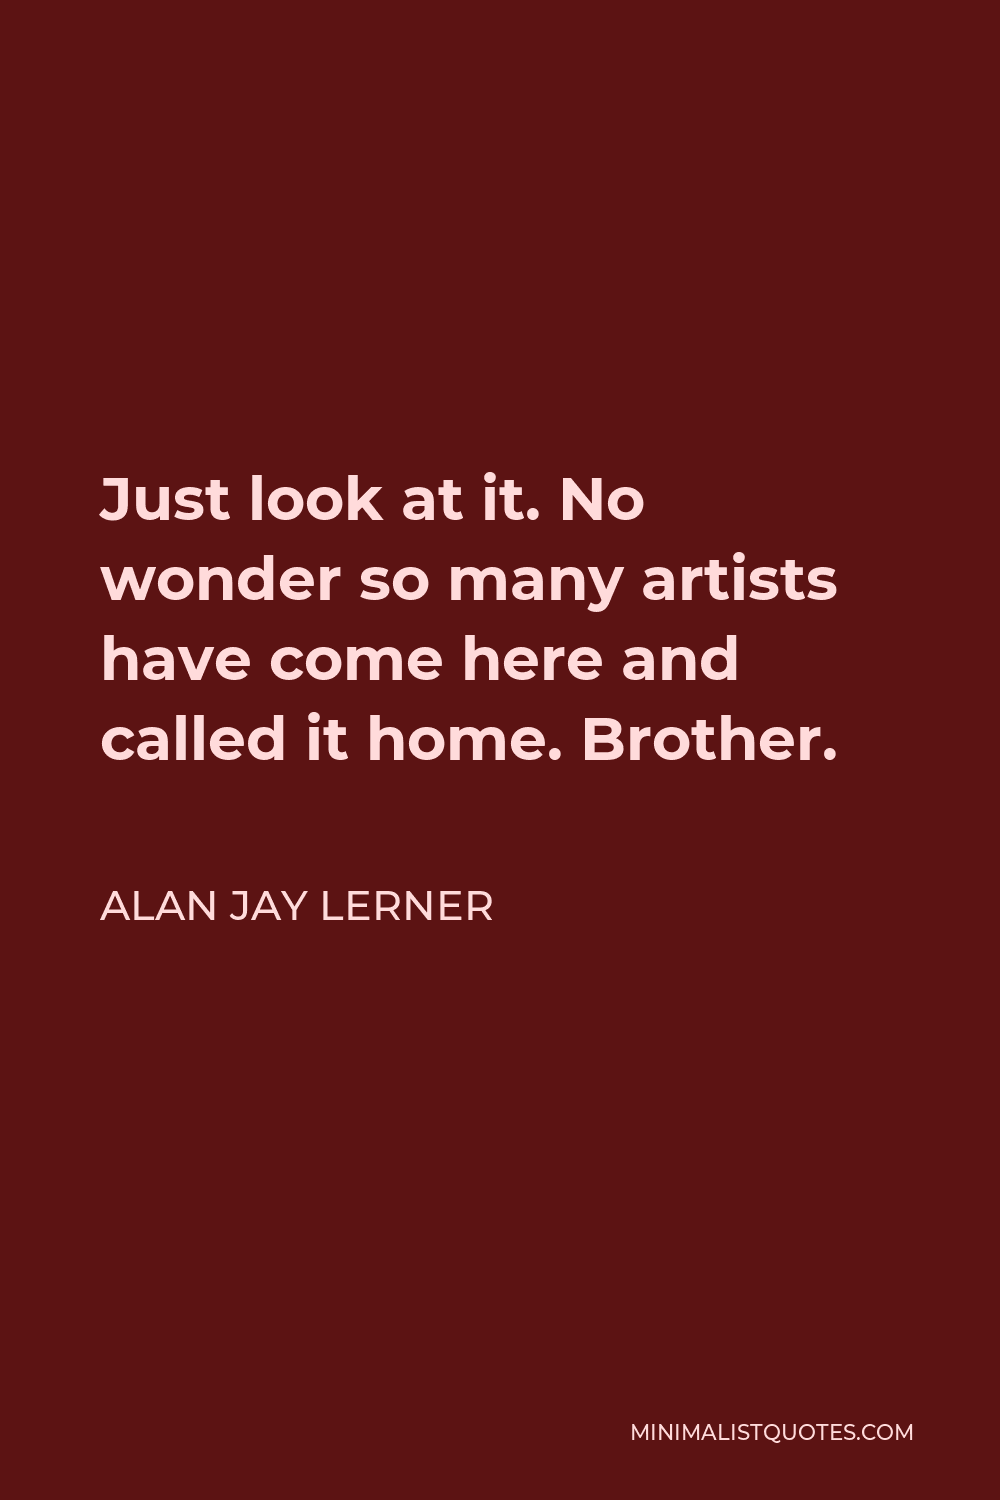 Alan Jay Lerner Quote - Just look at it. No wonder so many artists have come here and called it home. Brother.